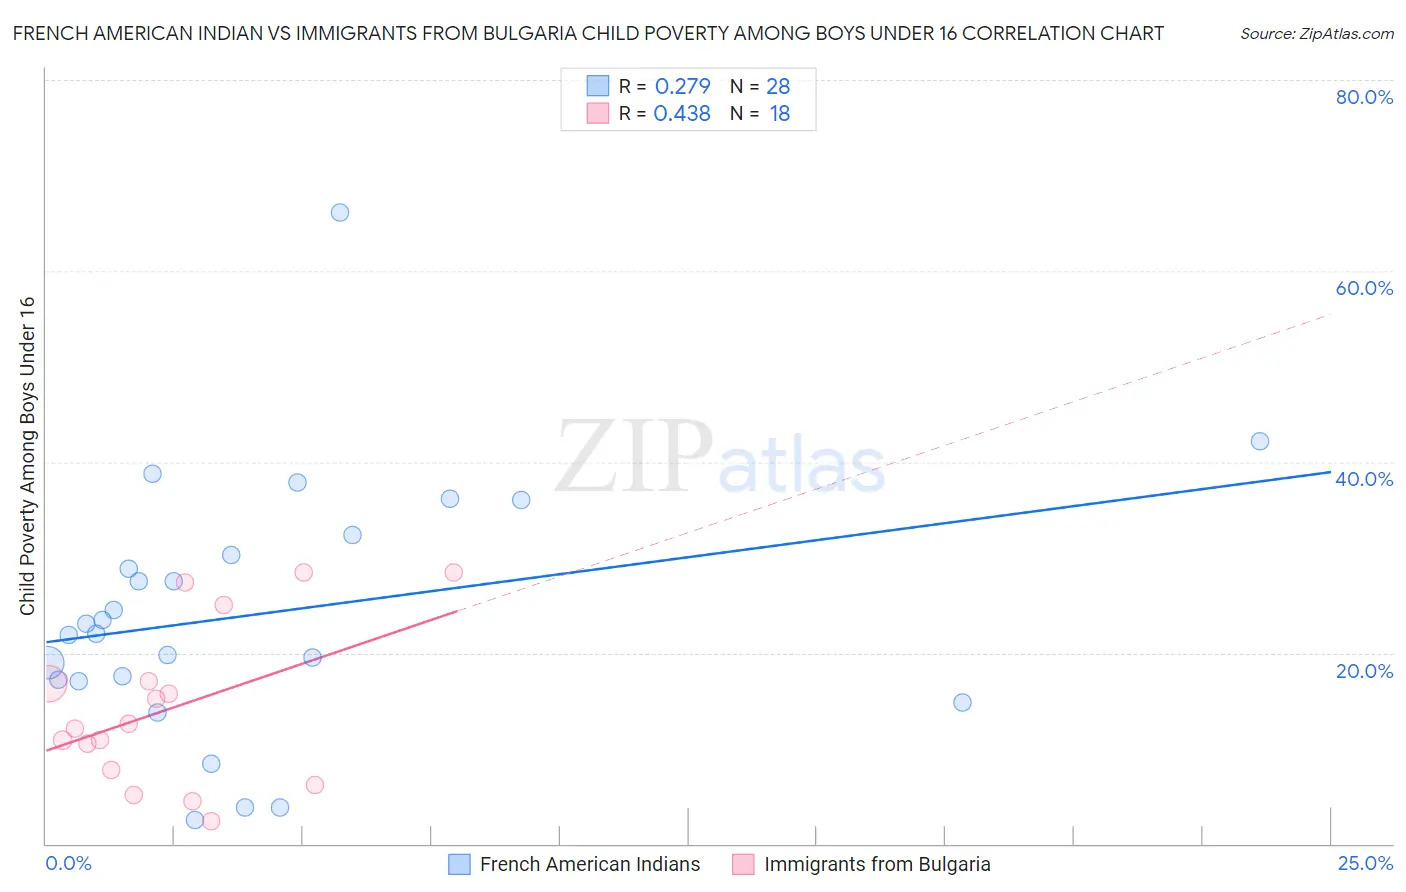 French American Indian vs Immigrants from Bulgaria Child Poverty Among Boys Under 16